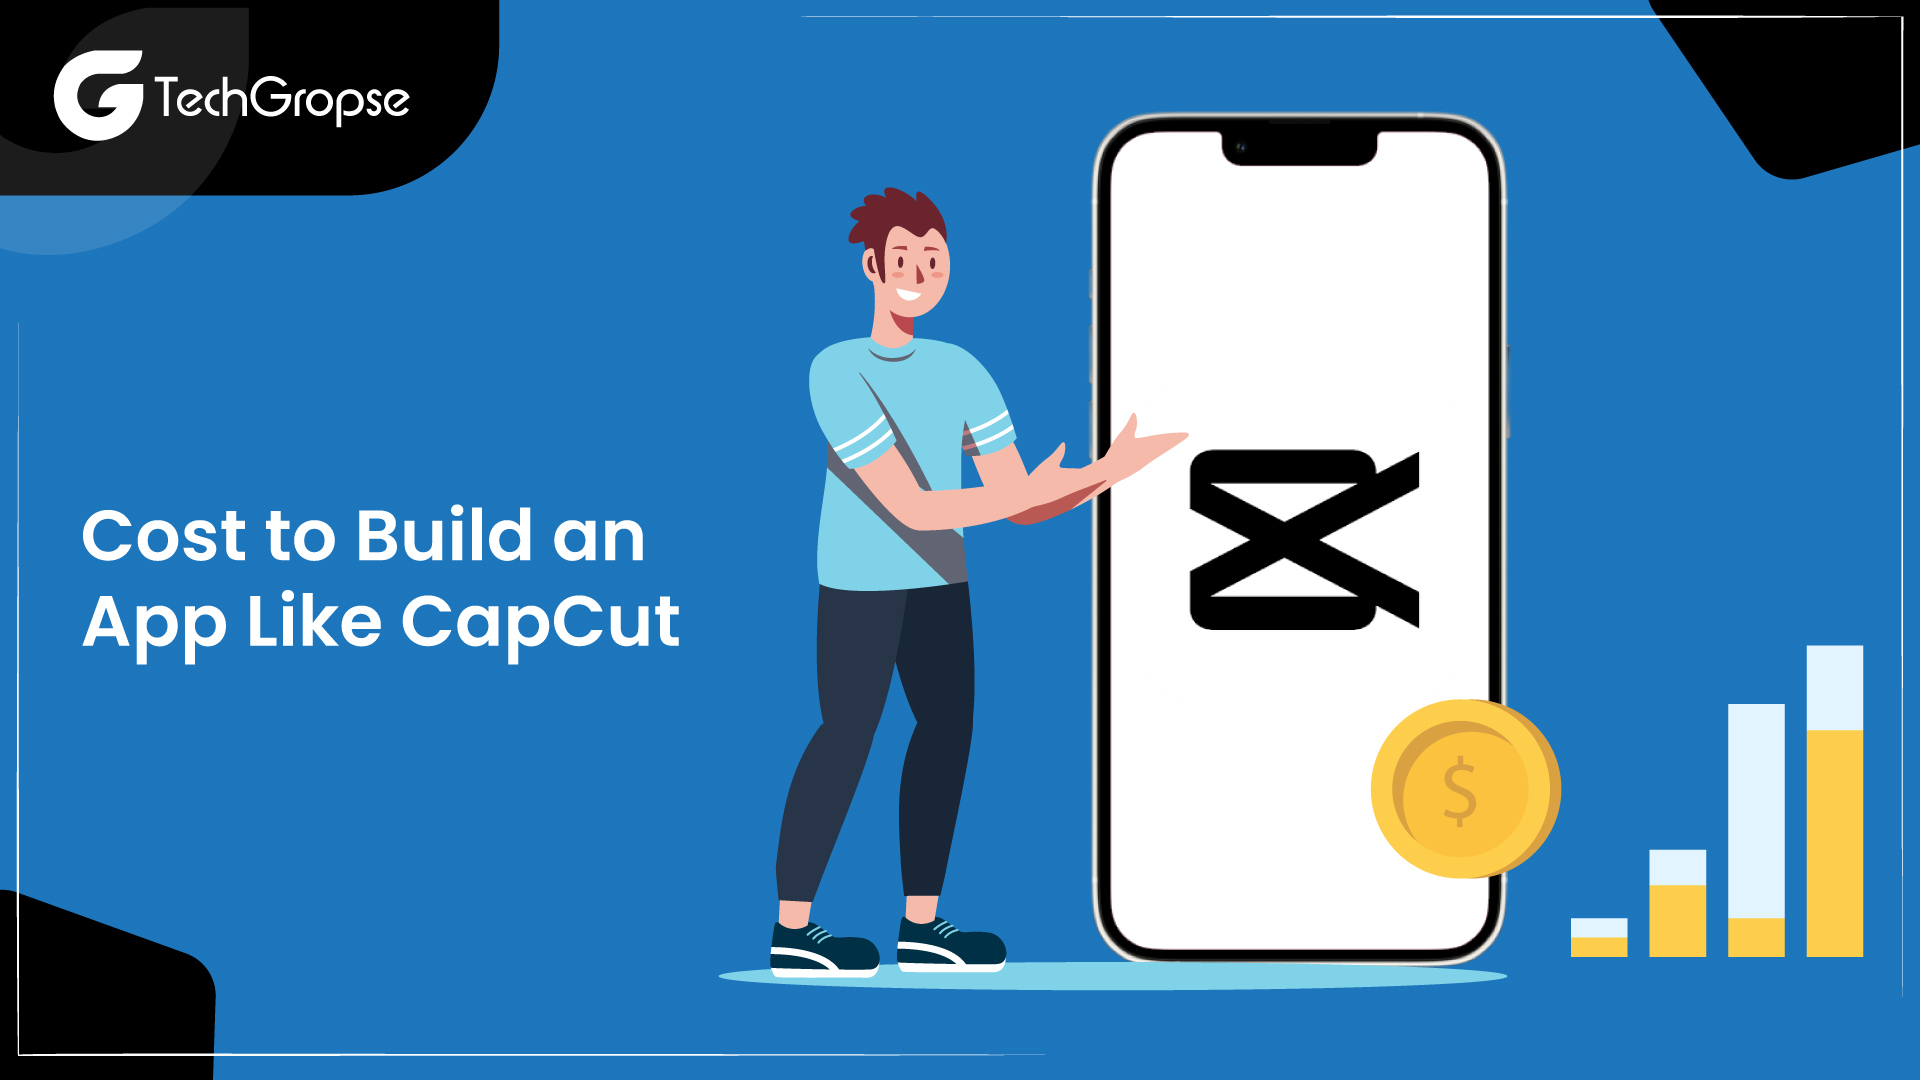 Cost to Build an App Like CapCut